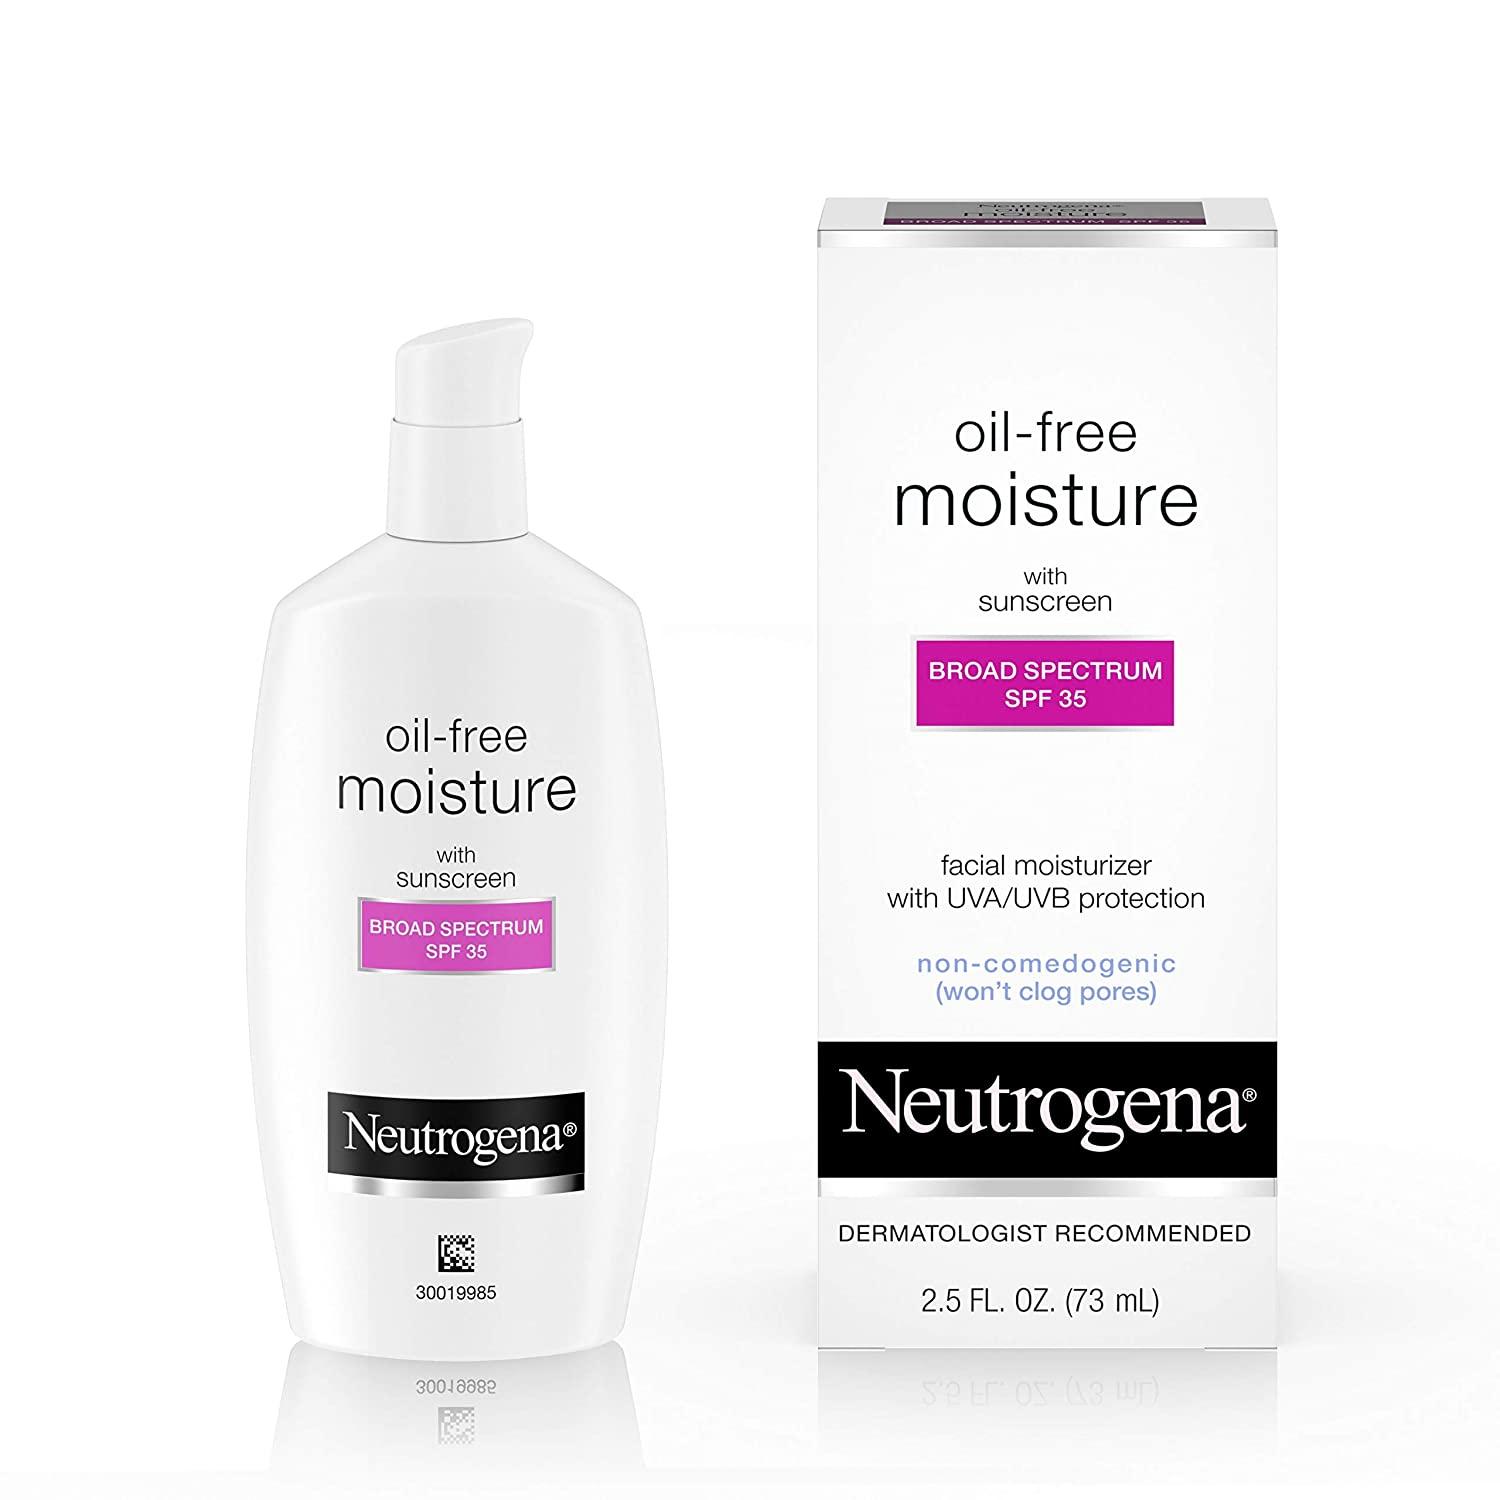 Neutrogena Oil-Free Moisturizer with SPF 35 Sunscreen for $5.18 Shipped